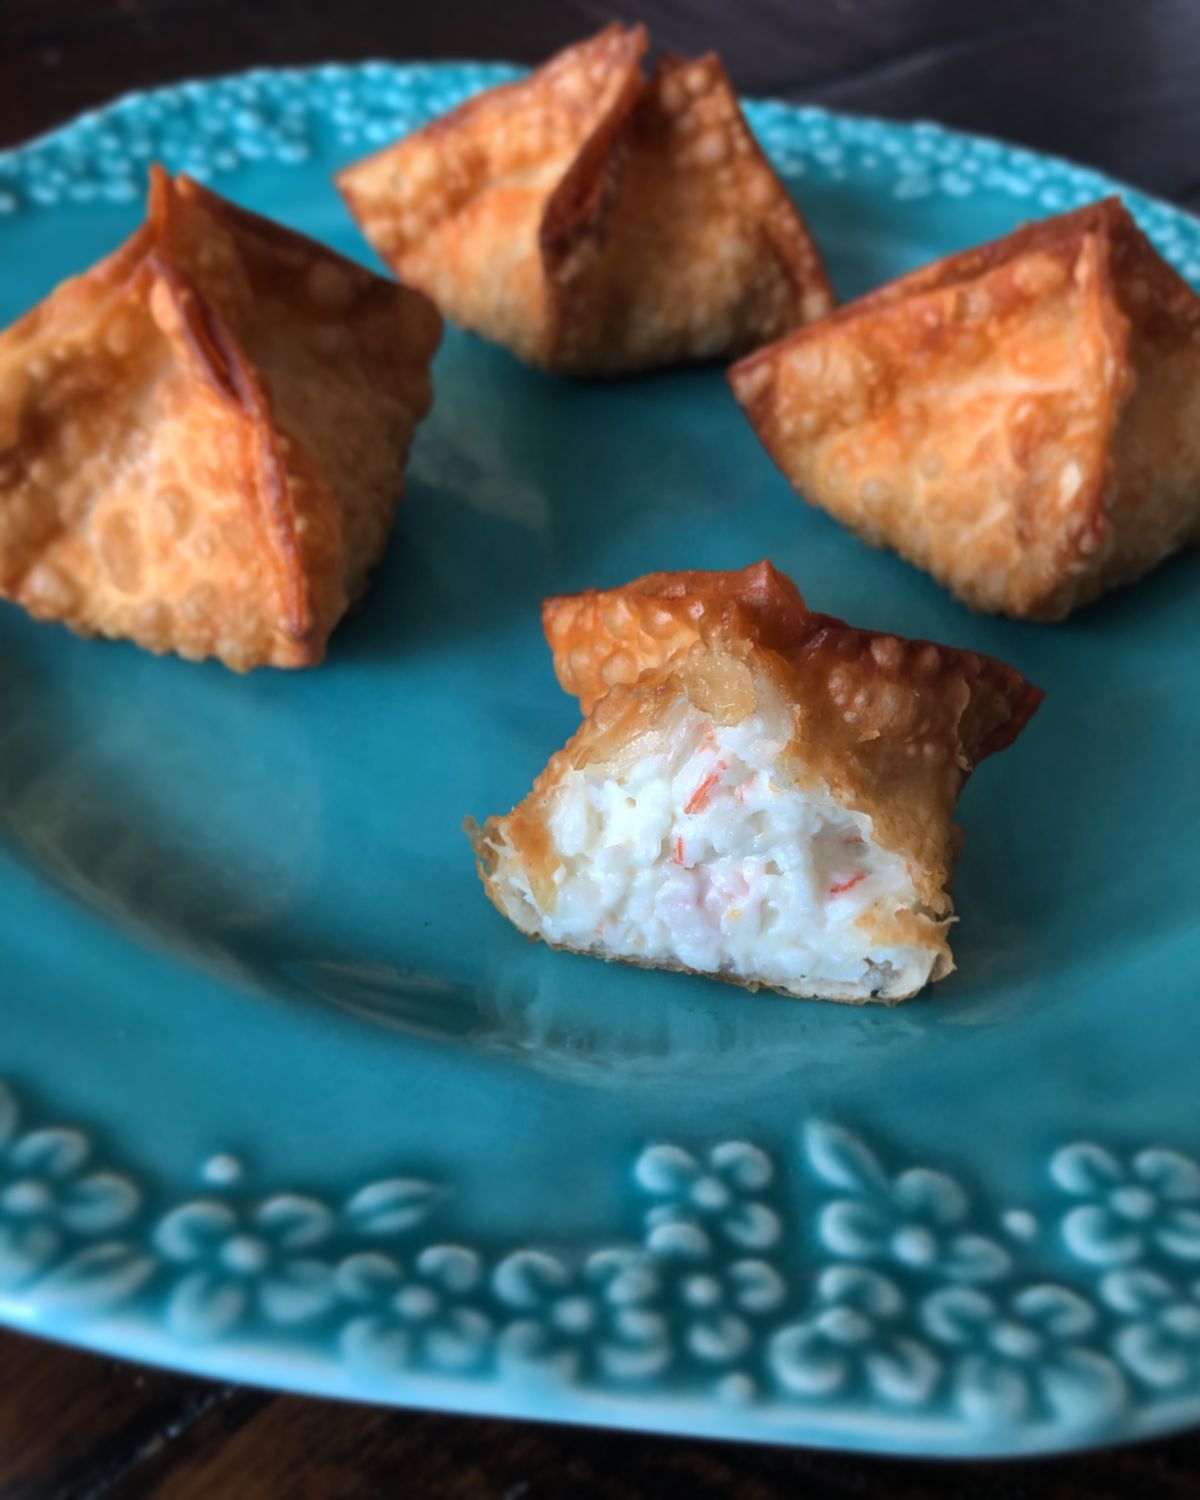 People who enjoy edibles have more options than sweets: there are some delightful methods to infuse cannabis into your cooking, such as Crab Rangoon.   (Courtesy Stephanie Lamb)